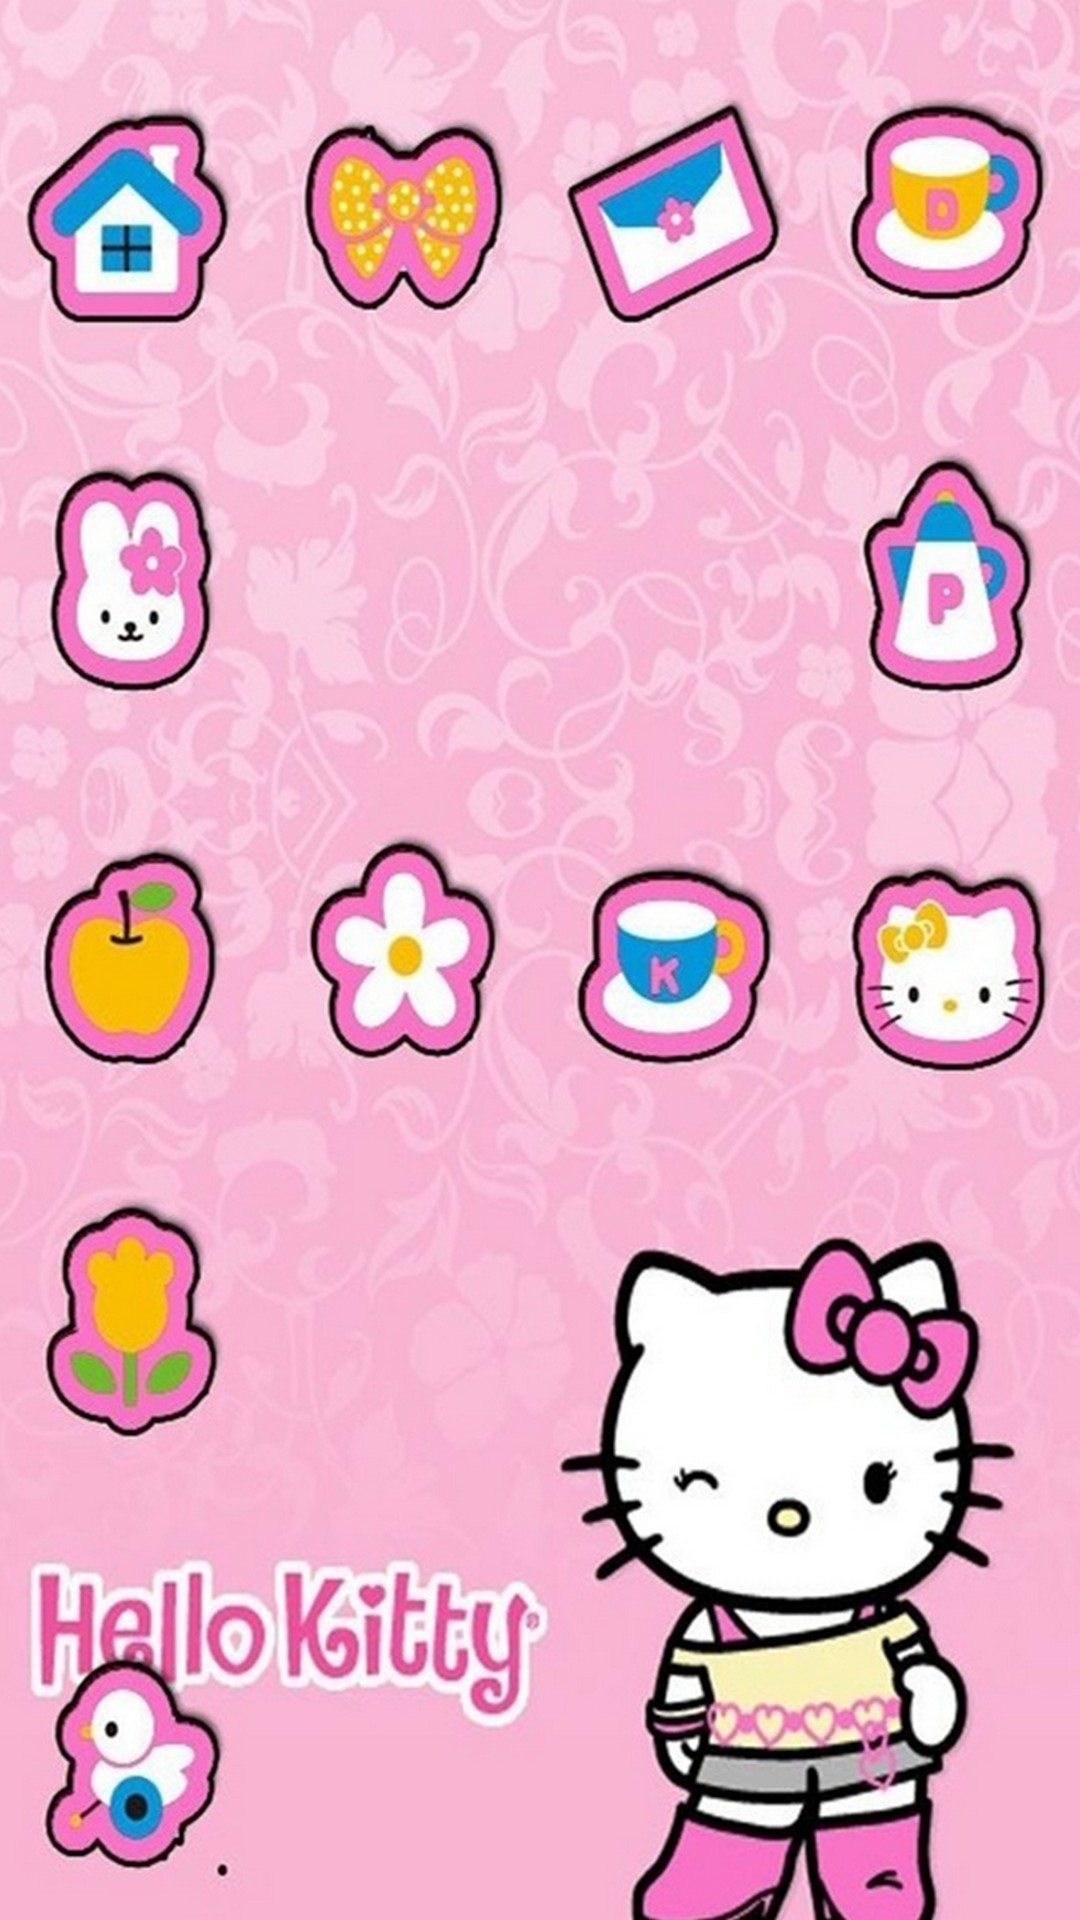 Android Wallpaper HD Hello Kitty with resolution 1080X1920 pixel. You can make this wallpaper for your Android backgrounds, Tablet, Smartphones Screensavers and Mobile Phone Lock Screen